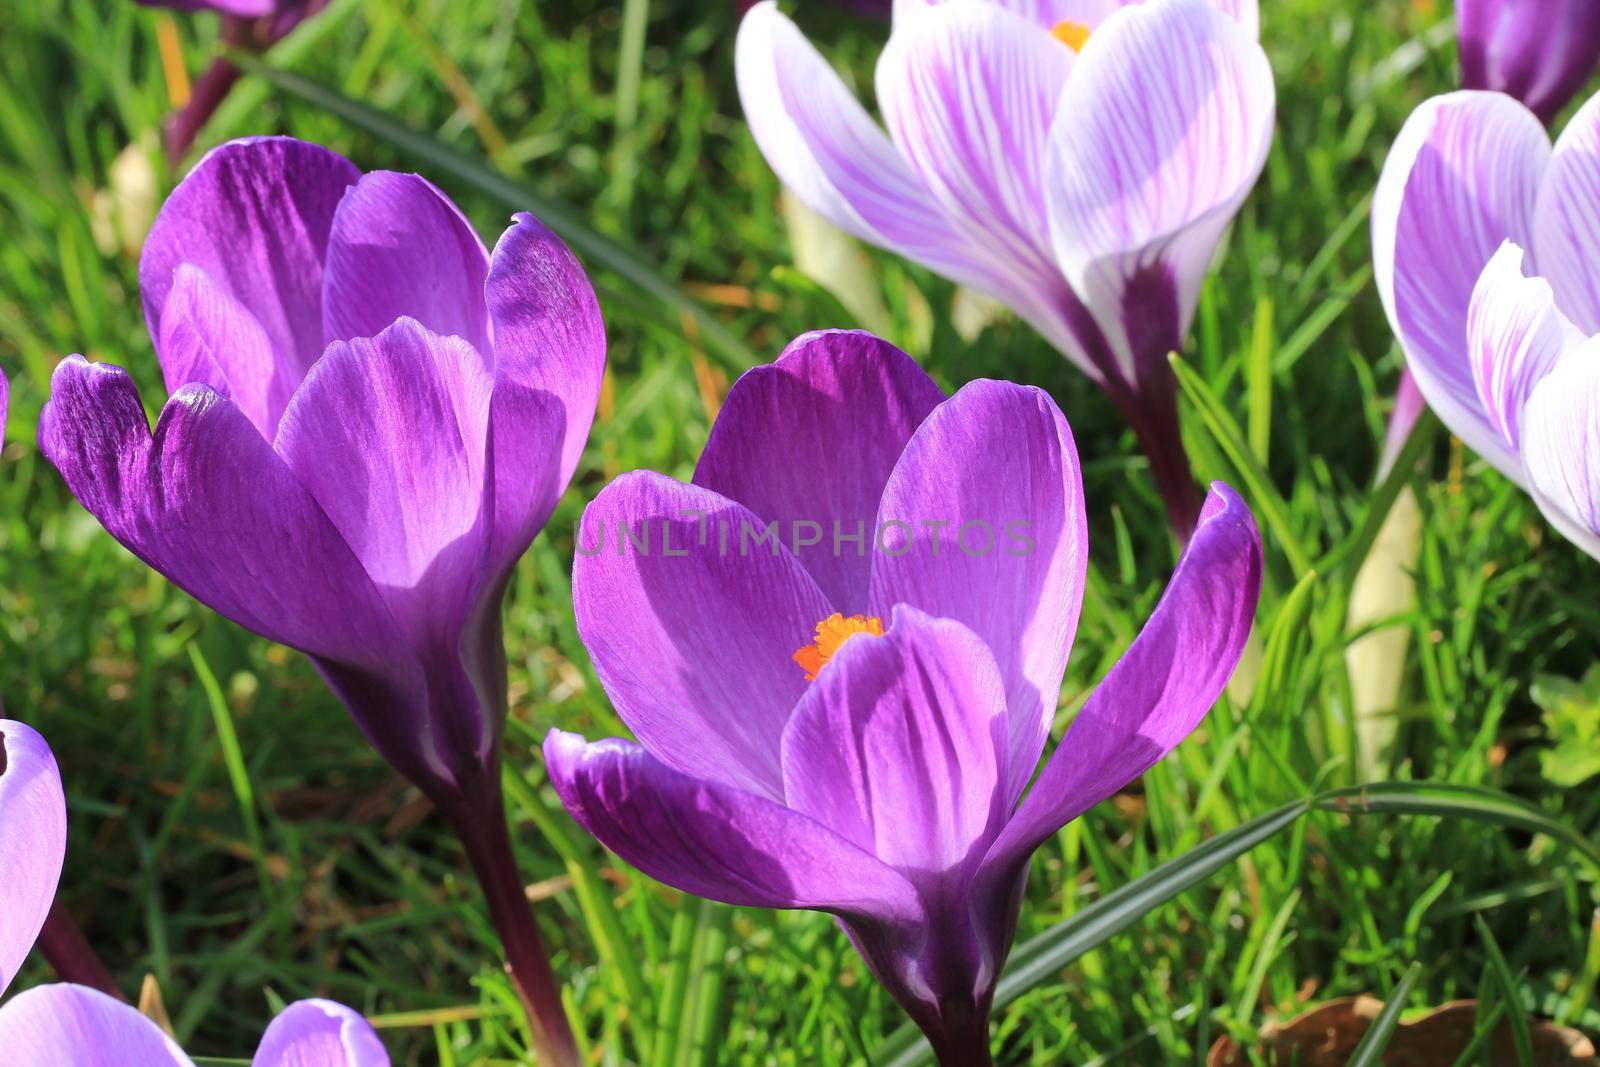 Purple and white crocuses on a field by studioportosabbia